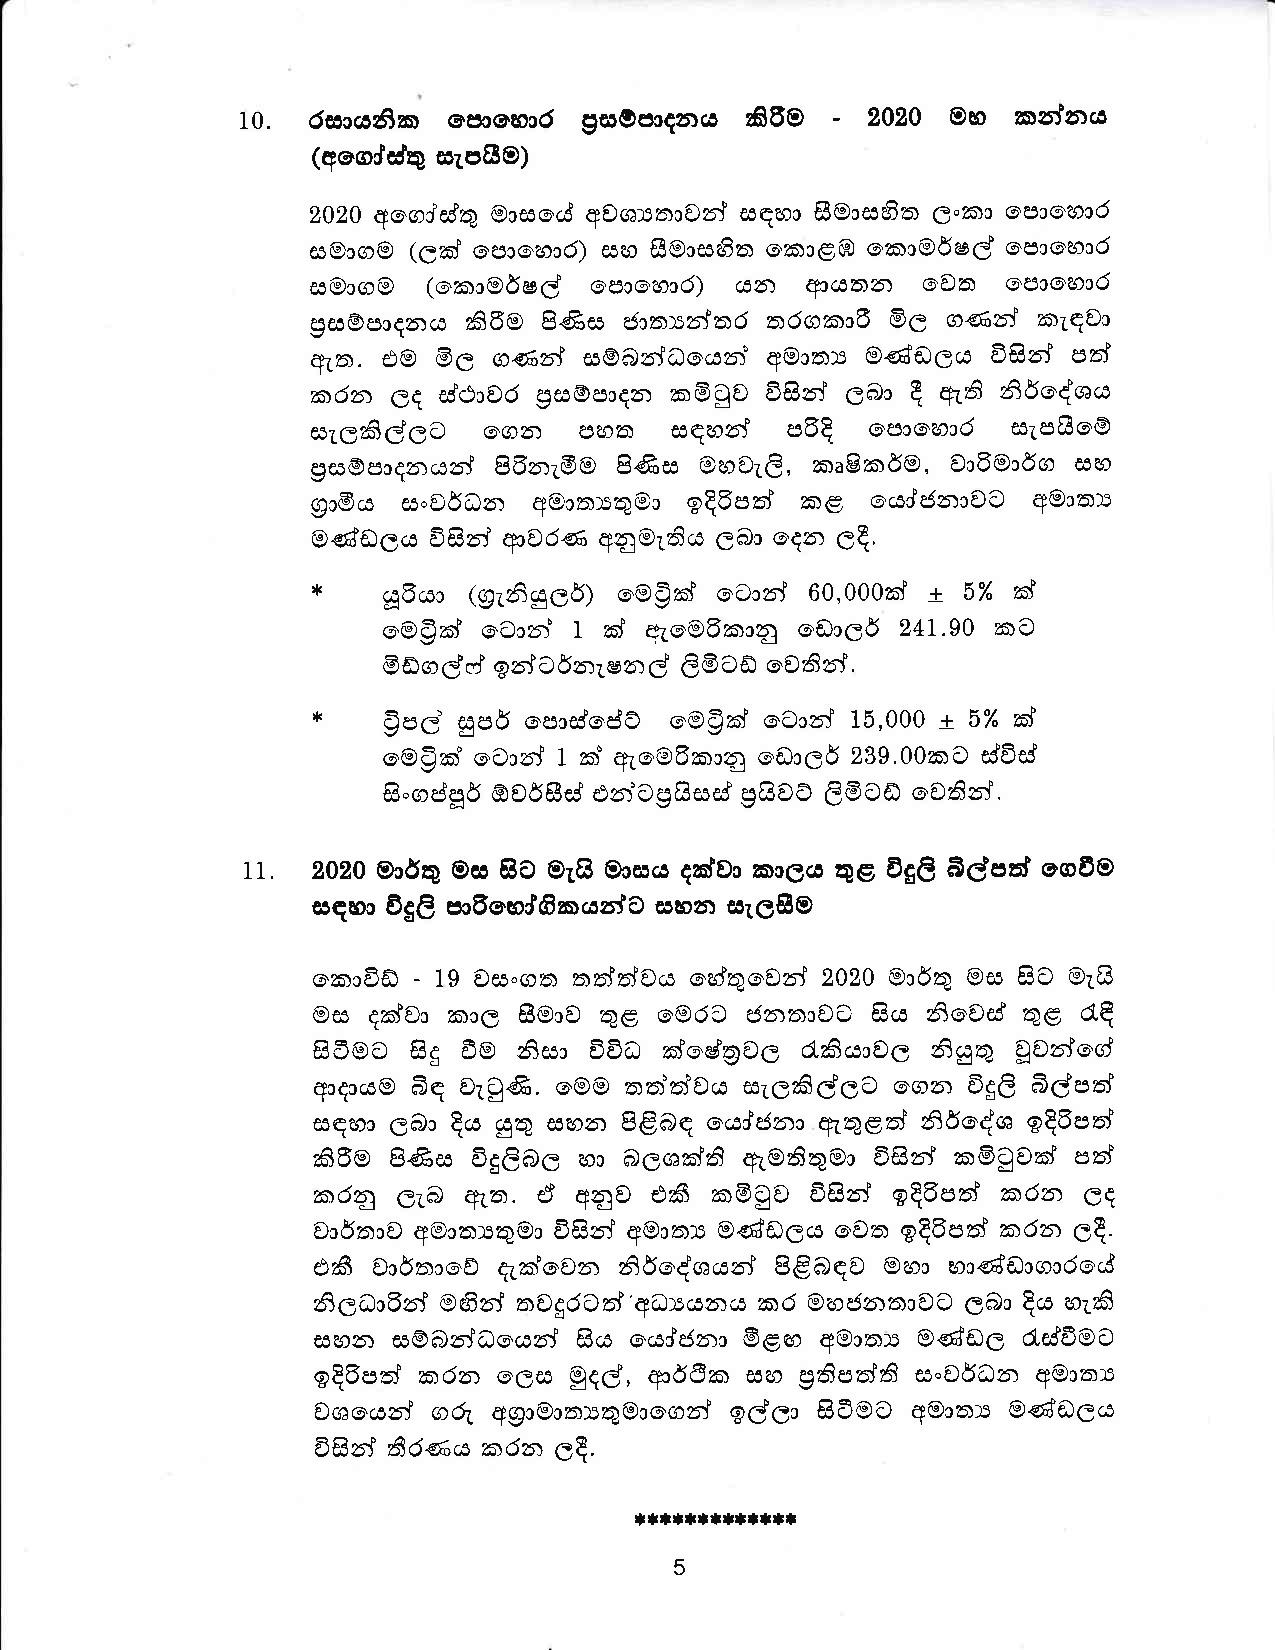 Cabinet Decision on 08.07.2020S page 005